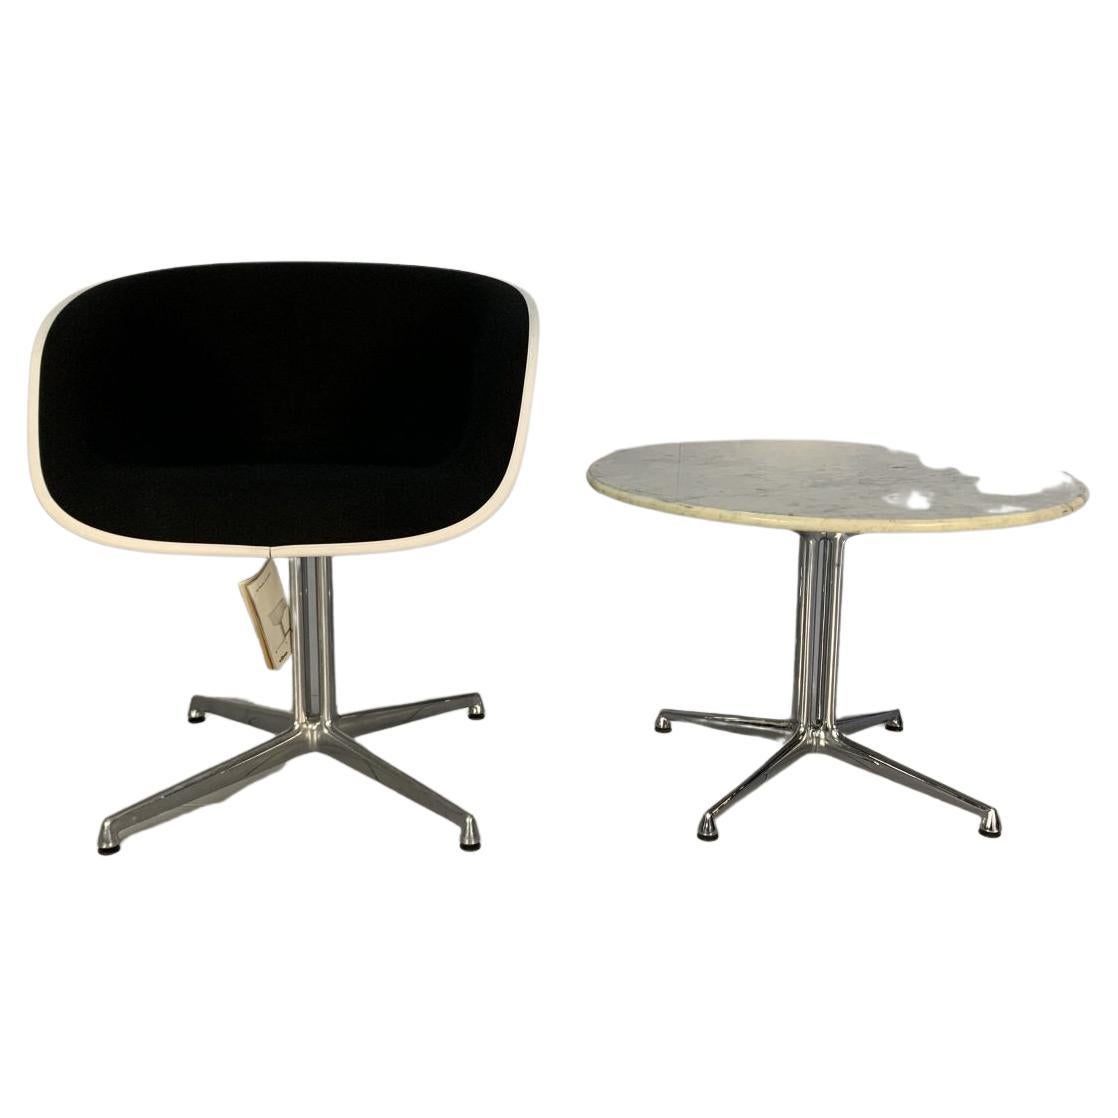 This is one of the most handsome, refined chair/table suites you could ever hope to find.

This is an rare opportunity to acquire what is, unequivocally, the best of the best, it being a most spectacular, immaculate, beautifully-presented Vitra